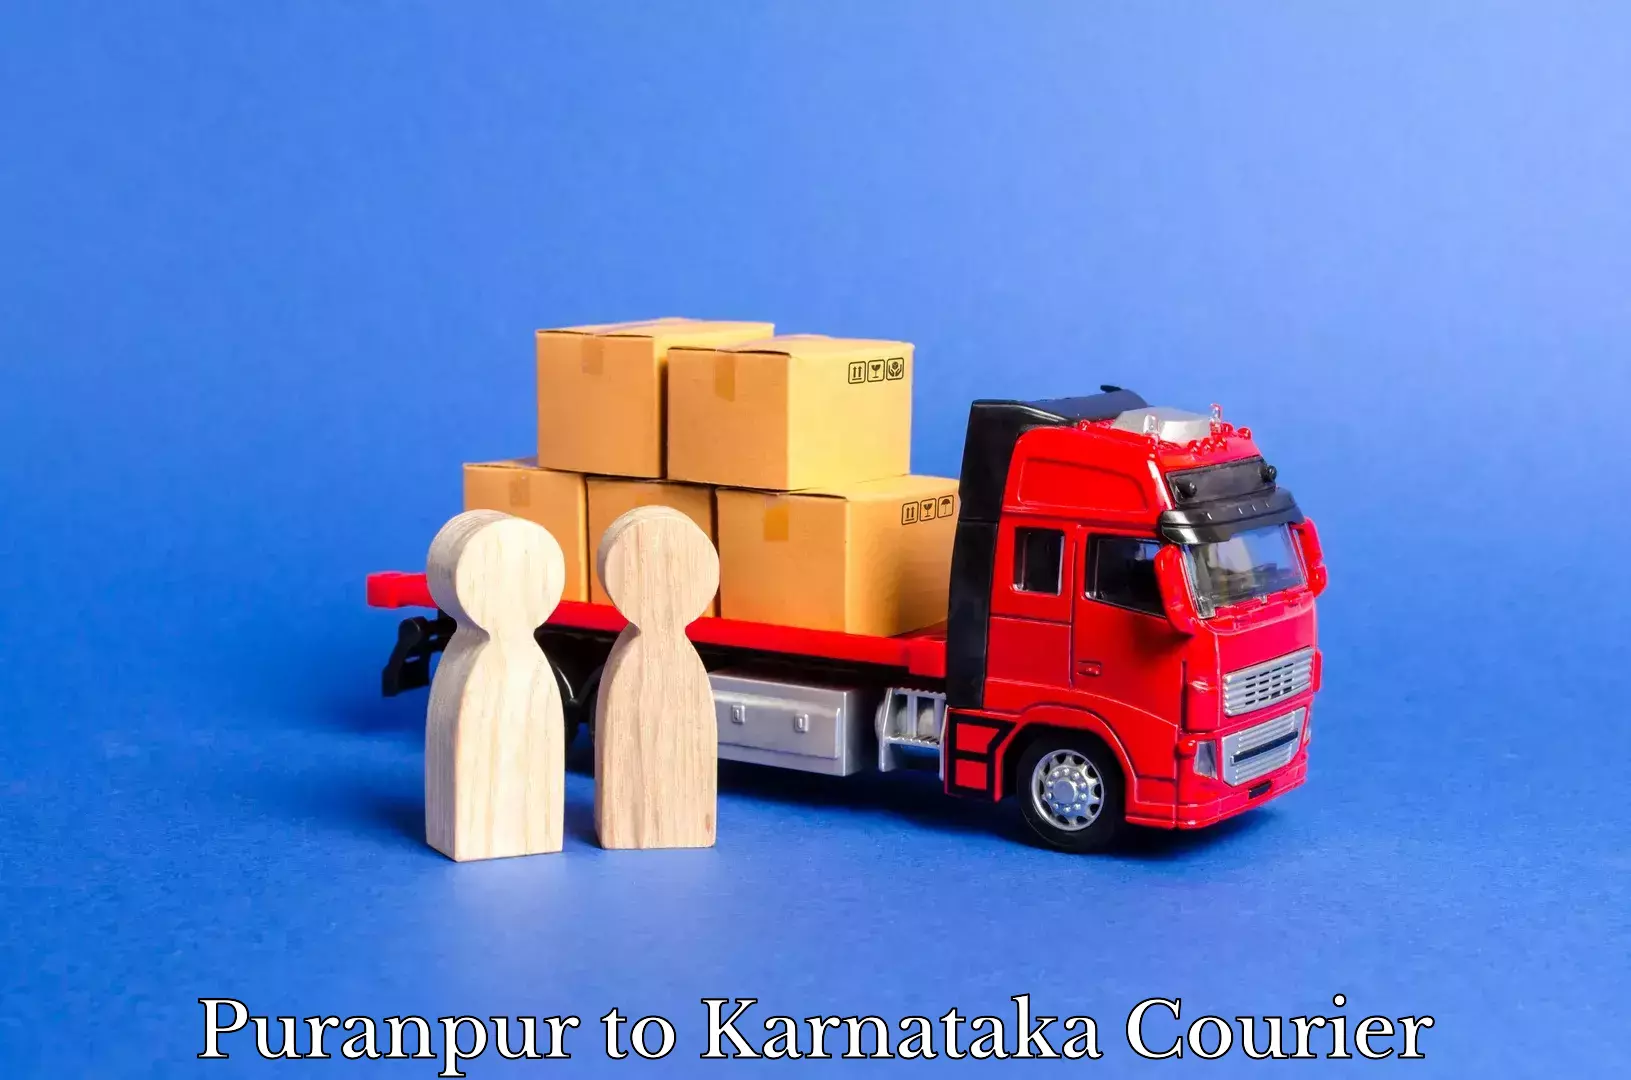 Same-day delivery solutions Puranpur to Karnataka